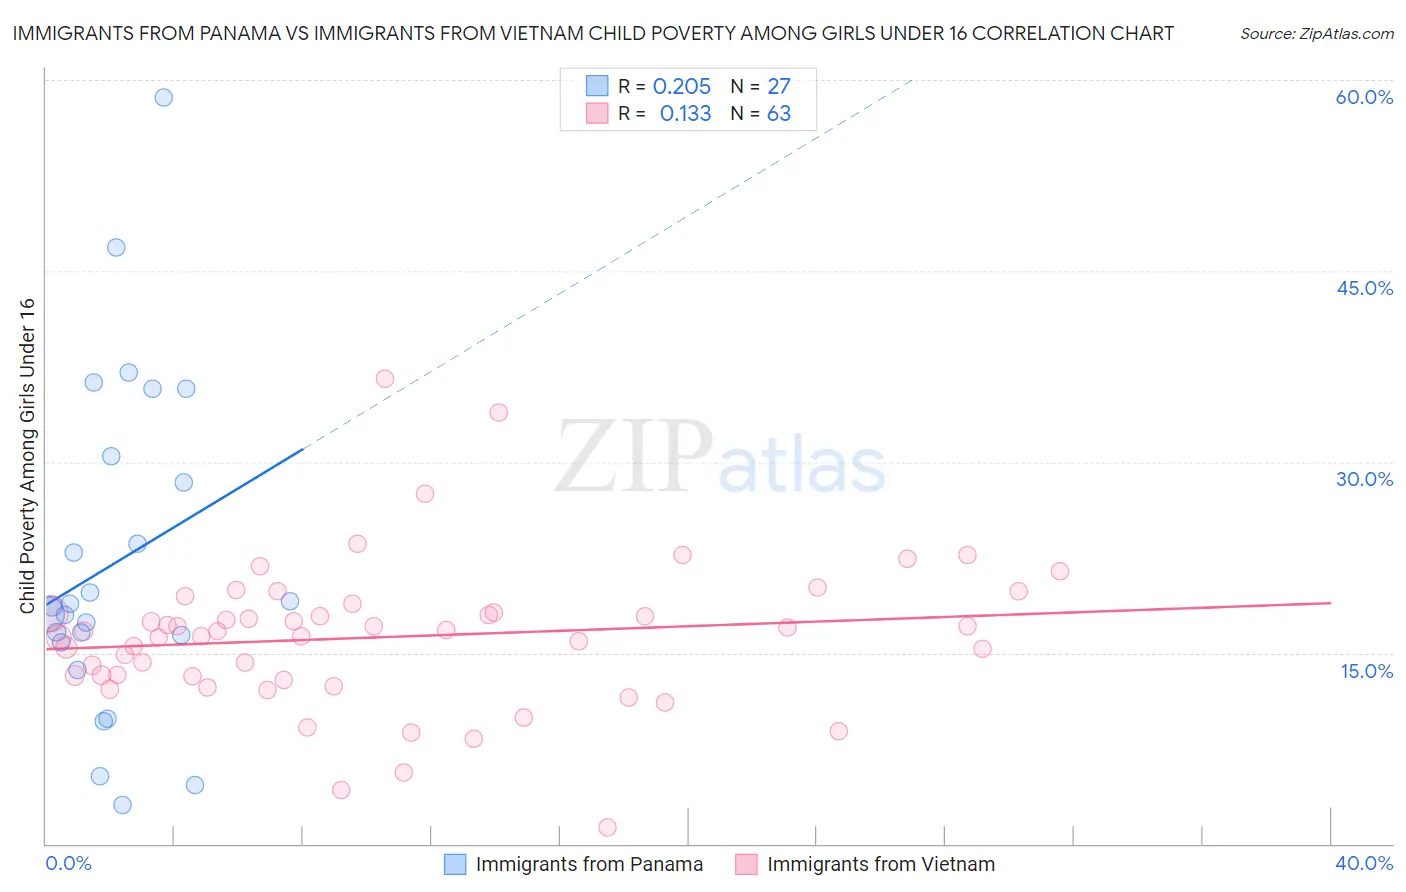 Immigrants from Panama vs Immigrants from Vietnam Child Poverty Among Girls Under 16